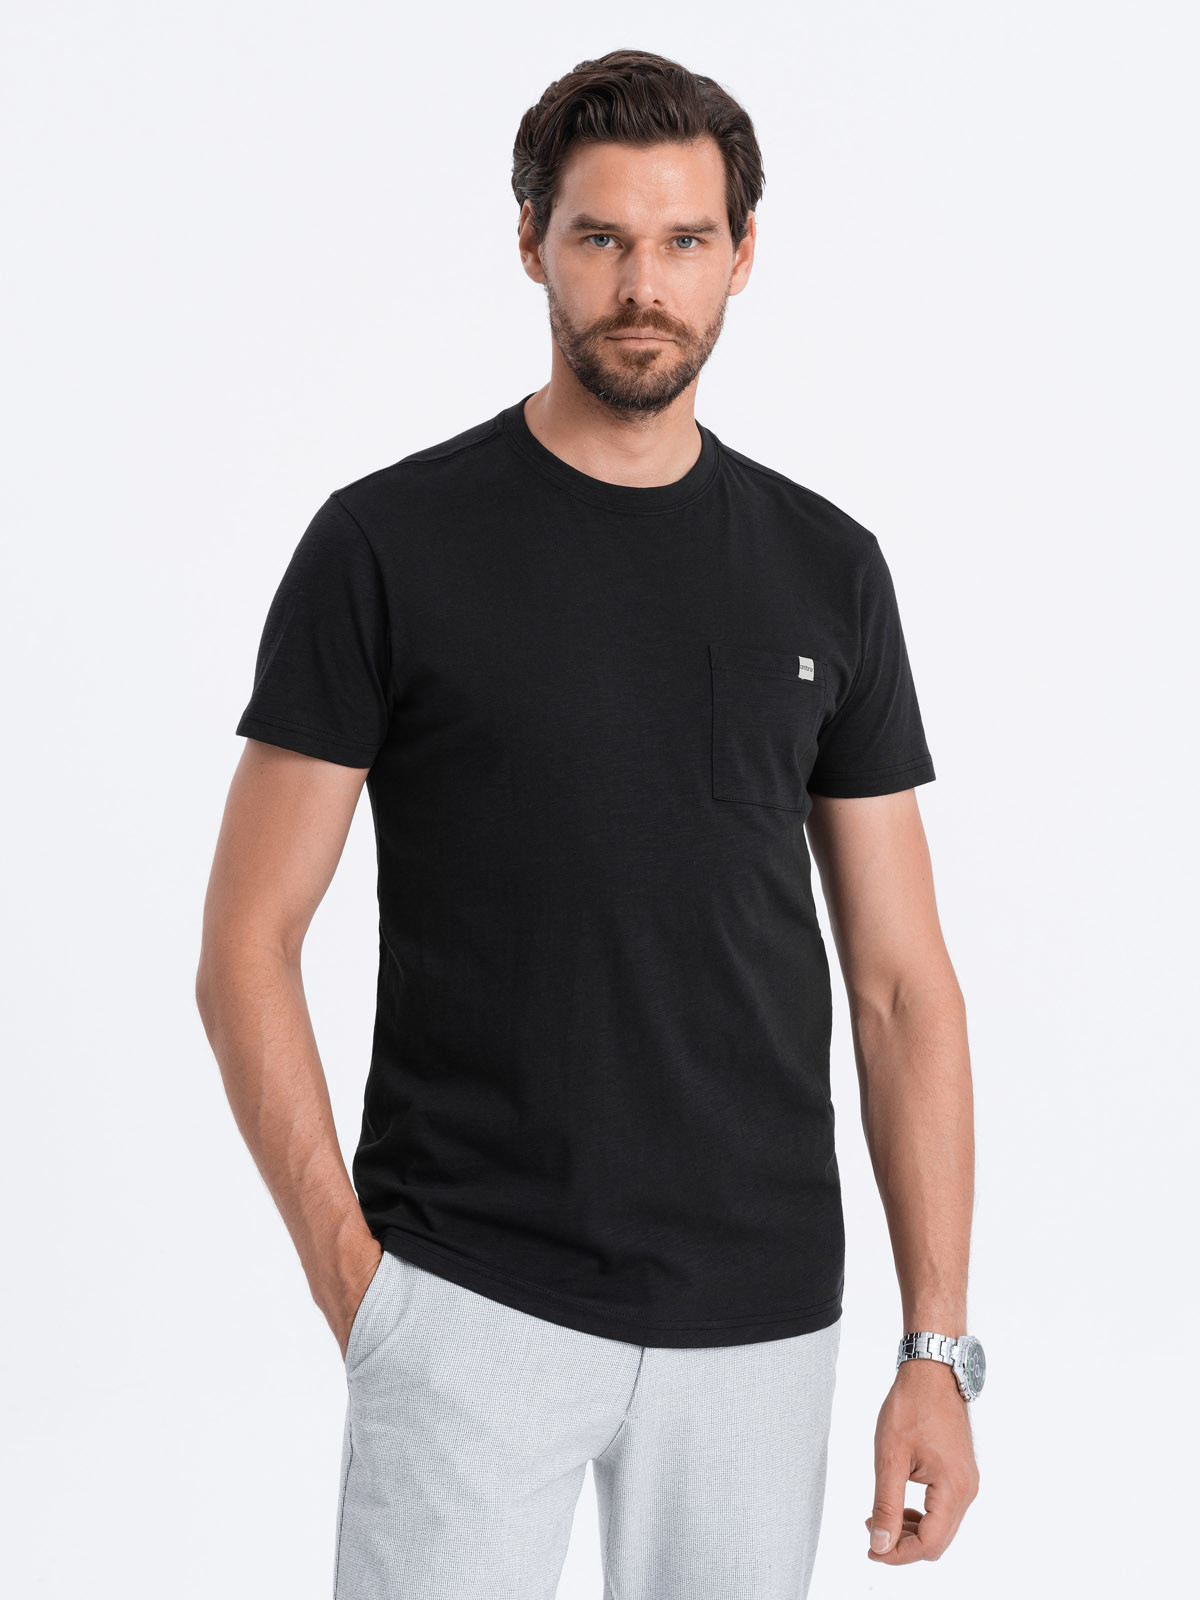 Men's knitted T-shirt with patch pocket V5 S1621